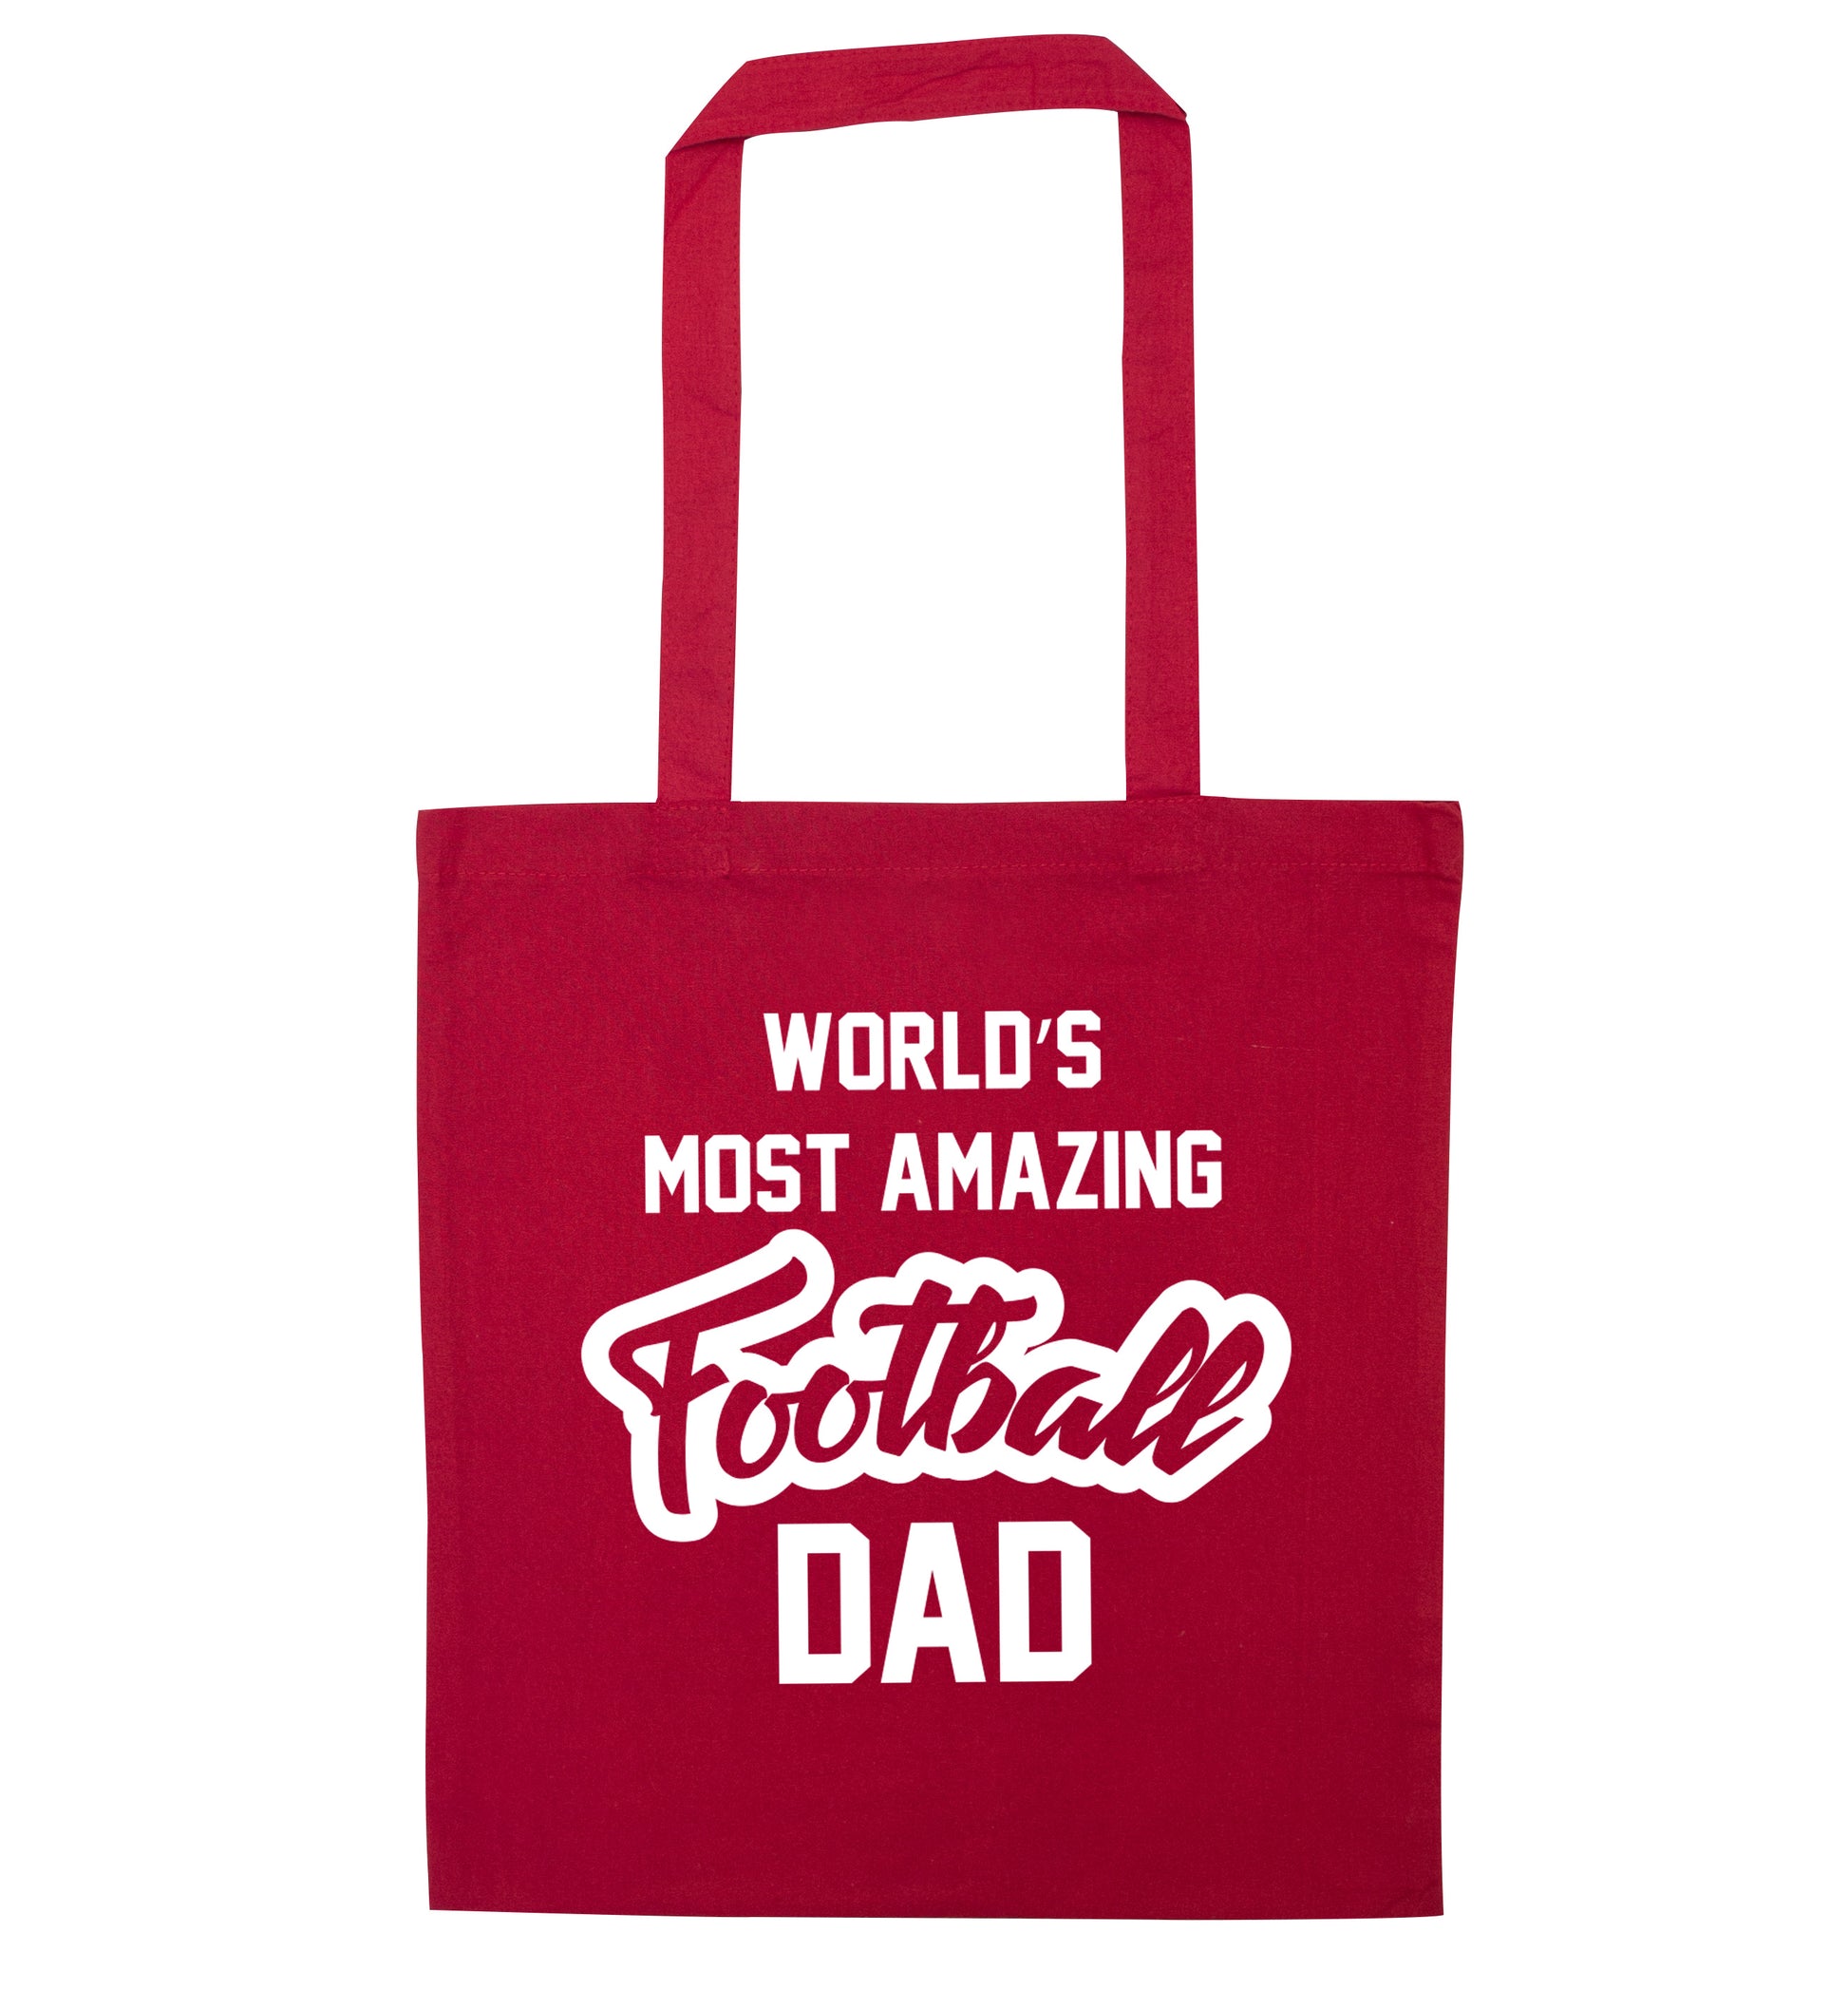 Worlds most amazing football dad red tote bag